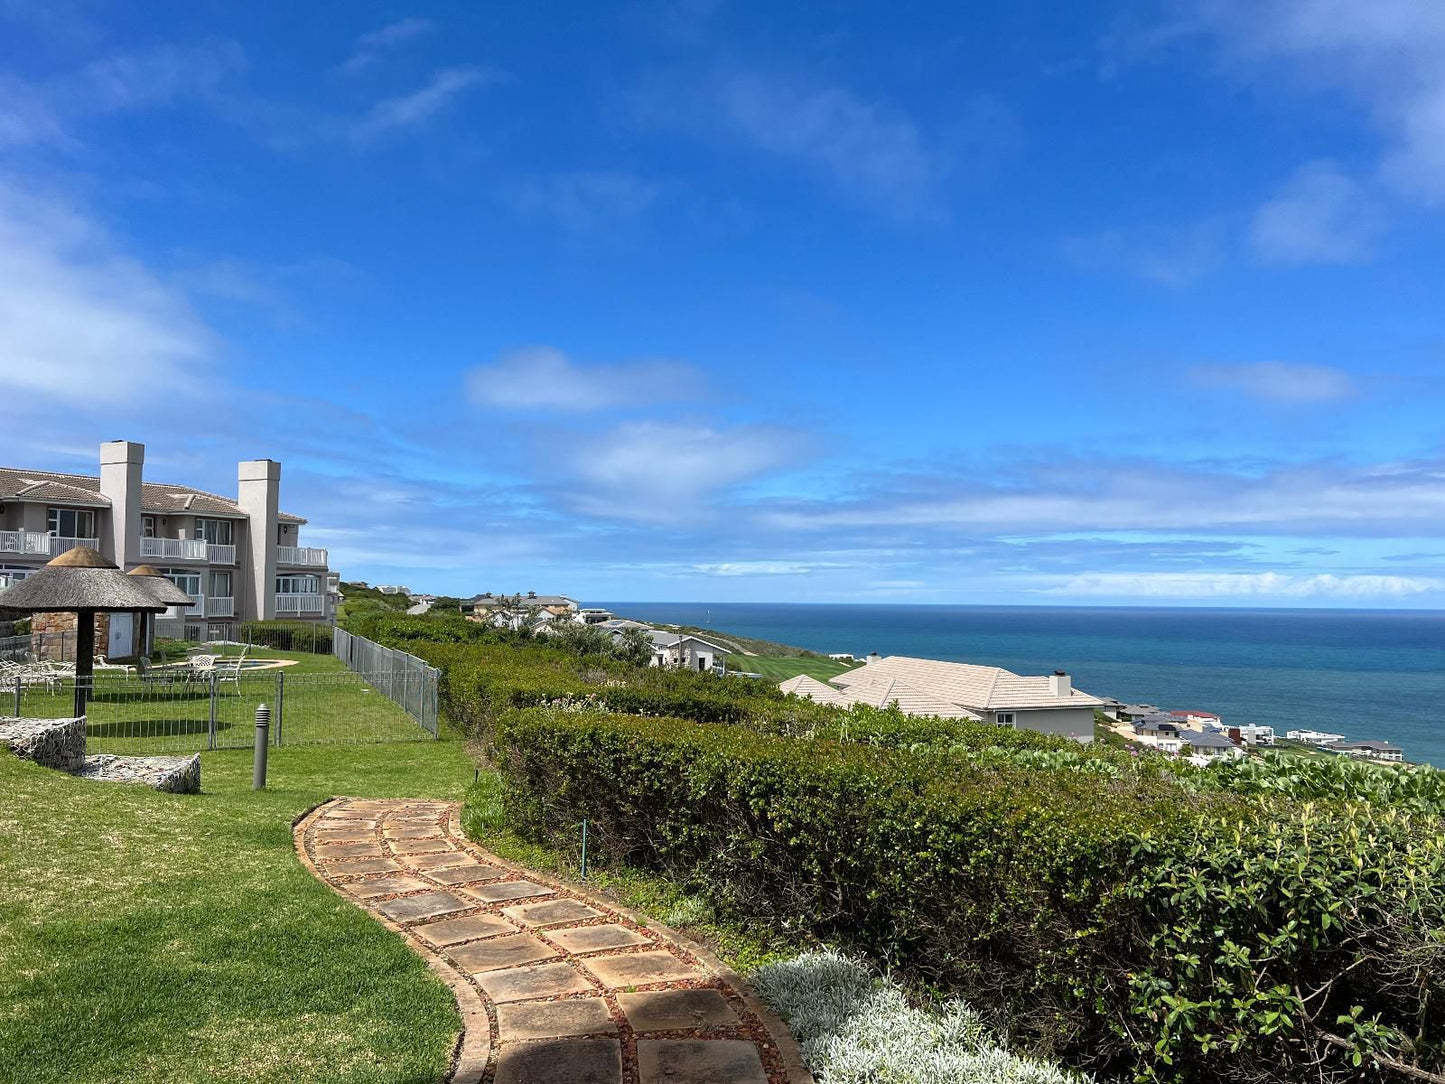 La Best Pinnacle Point Lodges Pinnacle Point Mossel Bay Western Cape South Africa Complementary Colors, Beach, Nature, Sand